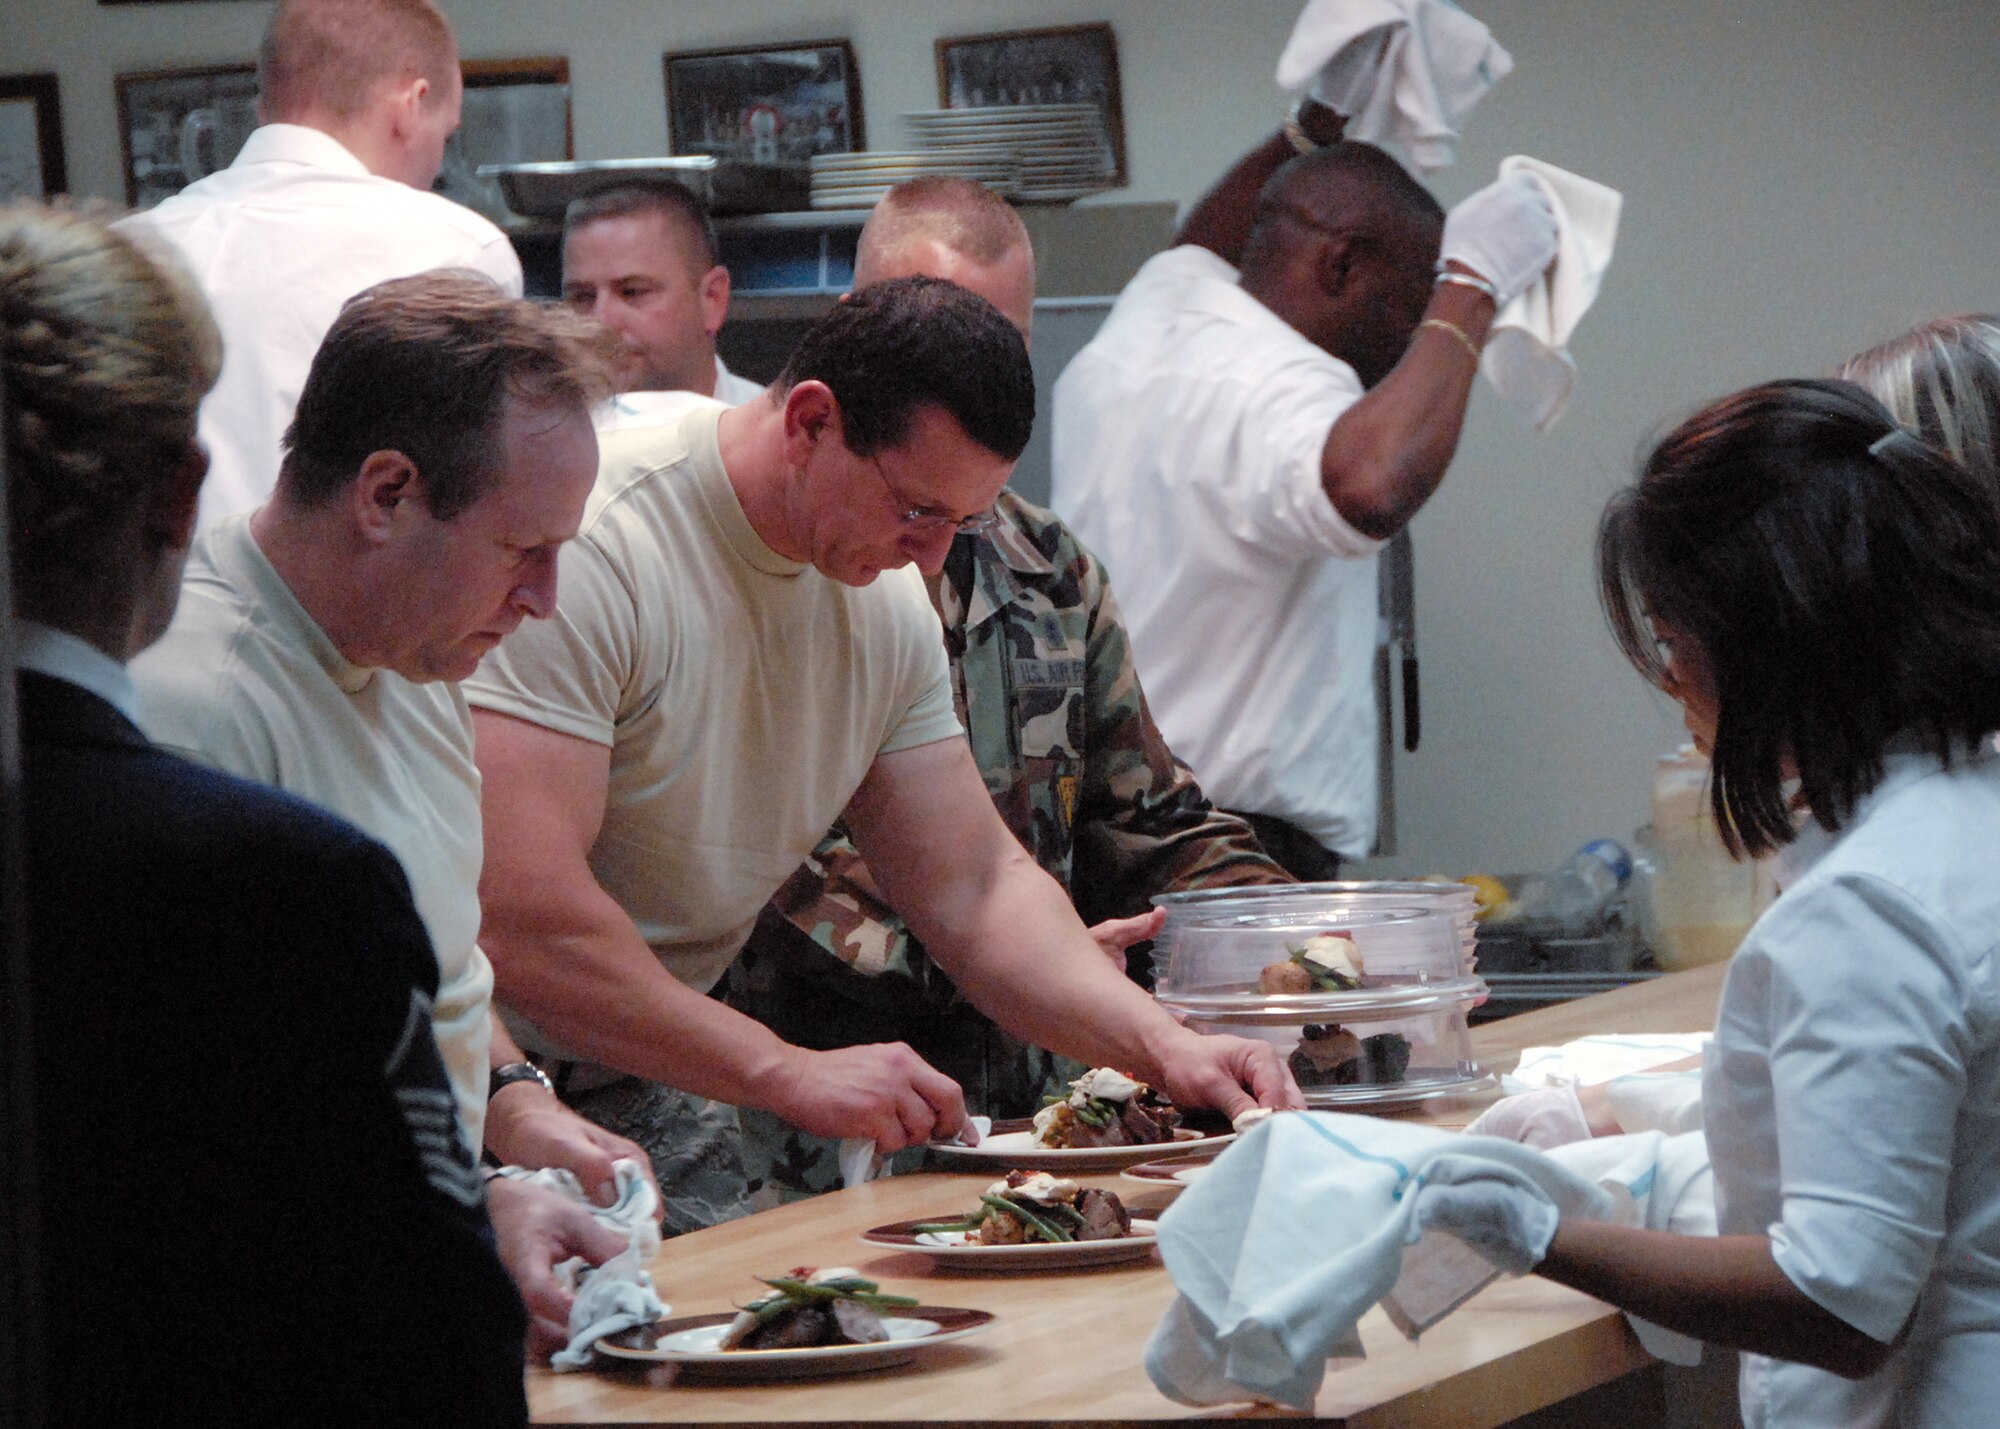 Chef Robert Irvine (center) of the Food Network's hit show 'Dinner: Impossible' plates a meal the evening of Sept. 22 during Sheppard's celebration of the Air Force's 60th Anniversary. The chef had less than 10 hours to gather and prepare food for 1,000 Airmen and guests at the celebration. (U.S. Air Force photo/Harry Tonemah)